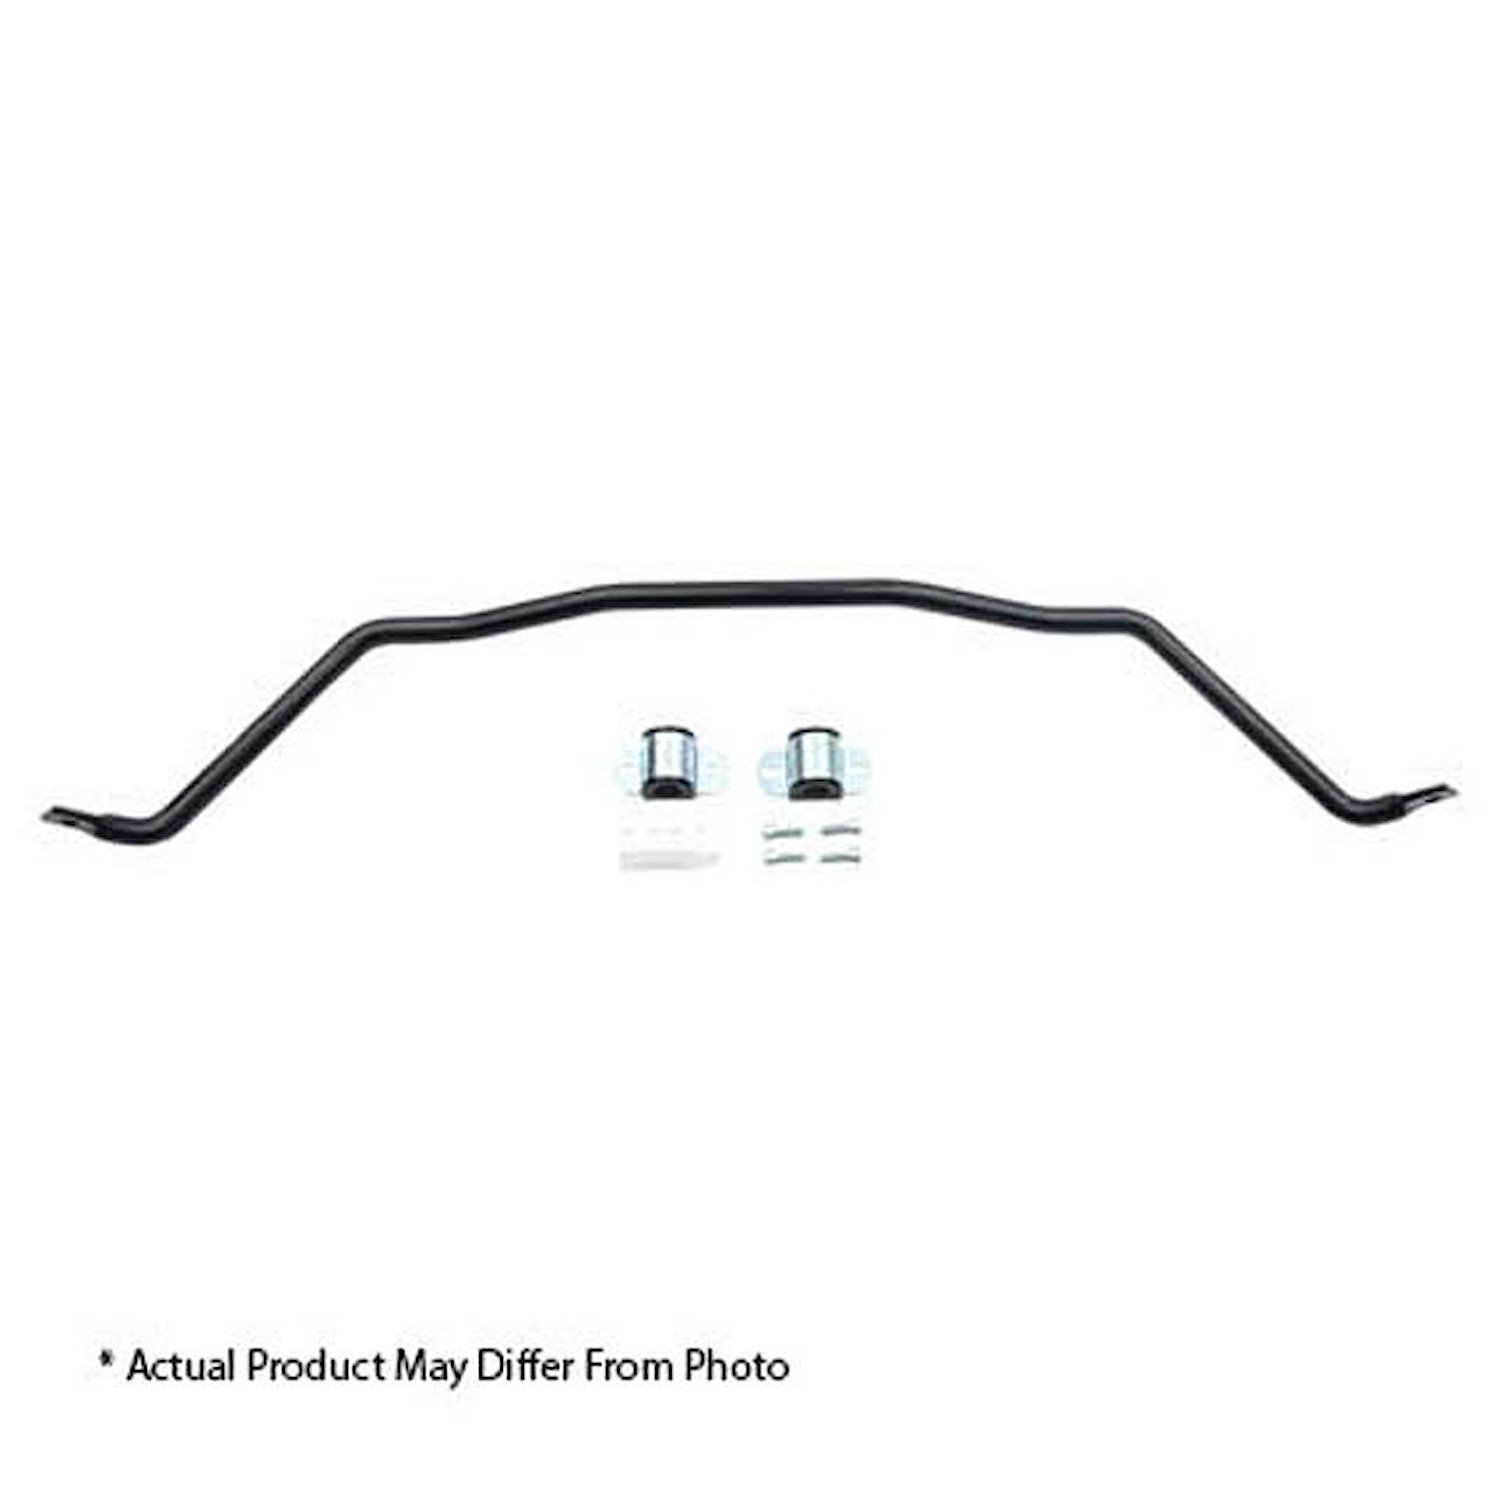 50334 Anti-Swaybar - Front for BMW 3 Series F30, F34, Sedan, GT 2WD; BMW 4 Series F32, F33, F36, Coupe, Conv. Gran Coupe; 2WD